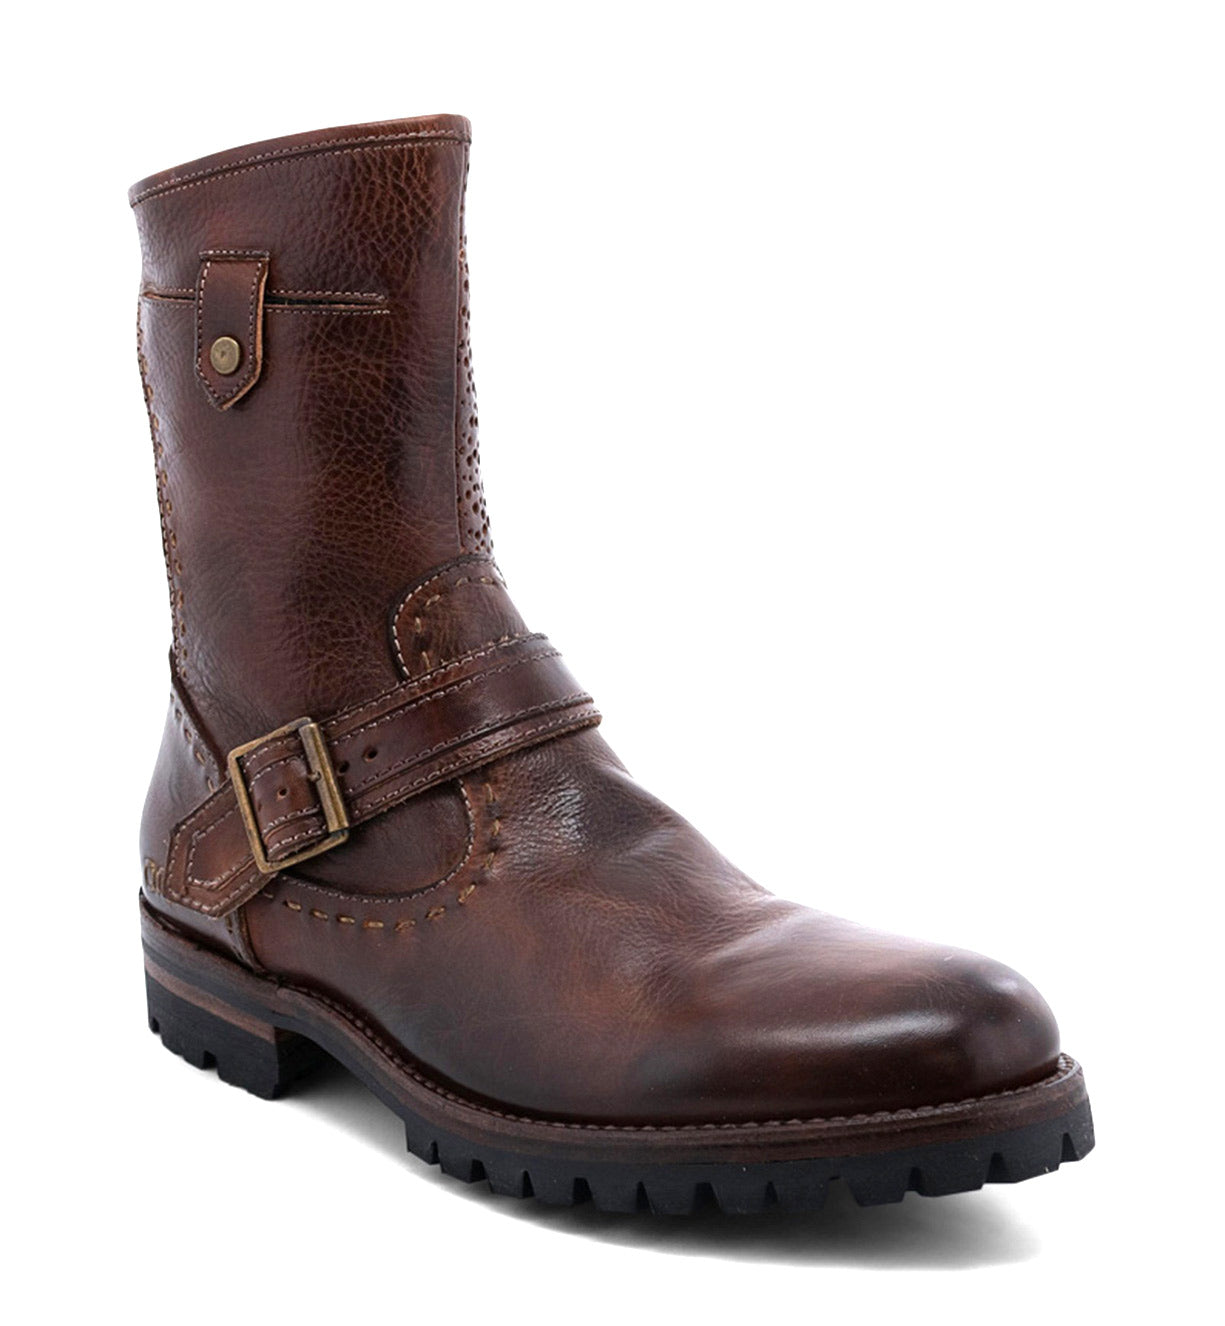 Men's Brando brown leather boots with Bed Stu buckles and buckles.